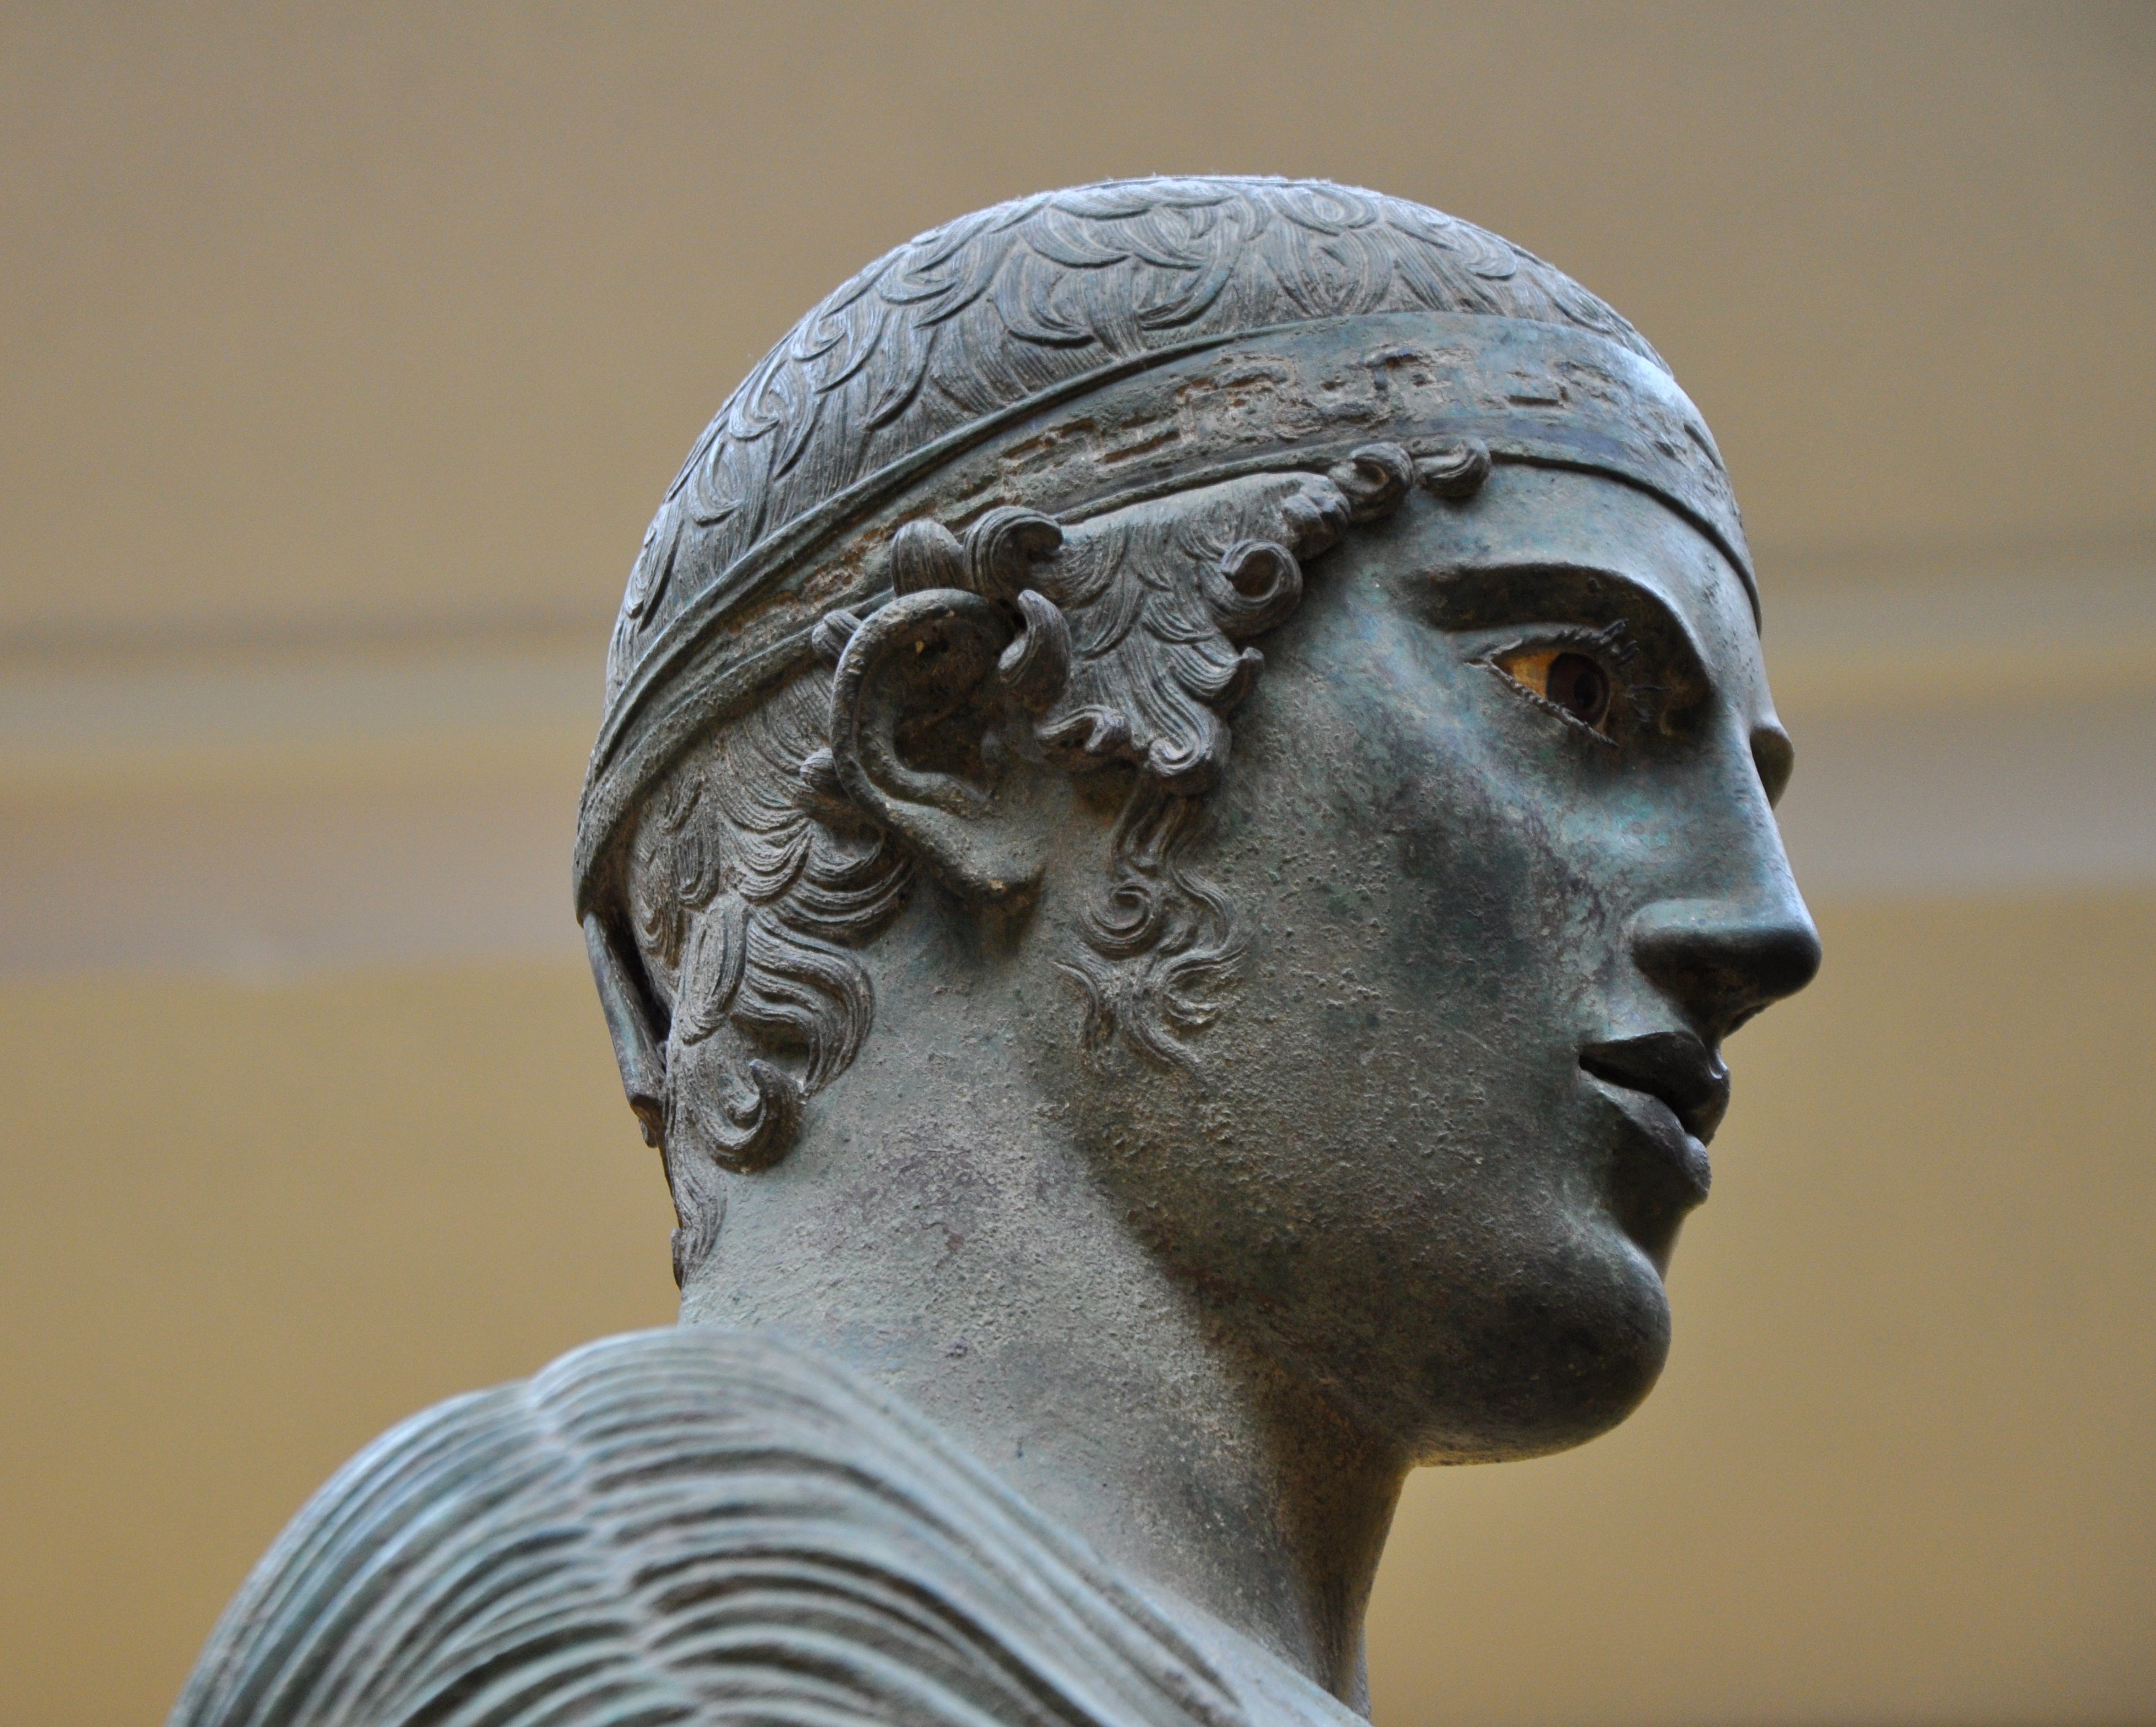 Closeup of the "Charioteer of Delphi." Greek bronze, circa 470s B.C.E. Image by Helen Simonsson (Own work) [CC BY-SA 3.0 (http://creativecommons.org/licenses/by-sa/3.0)], via Wikimedia Commons.